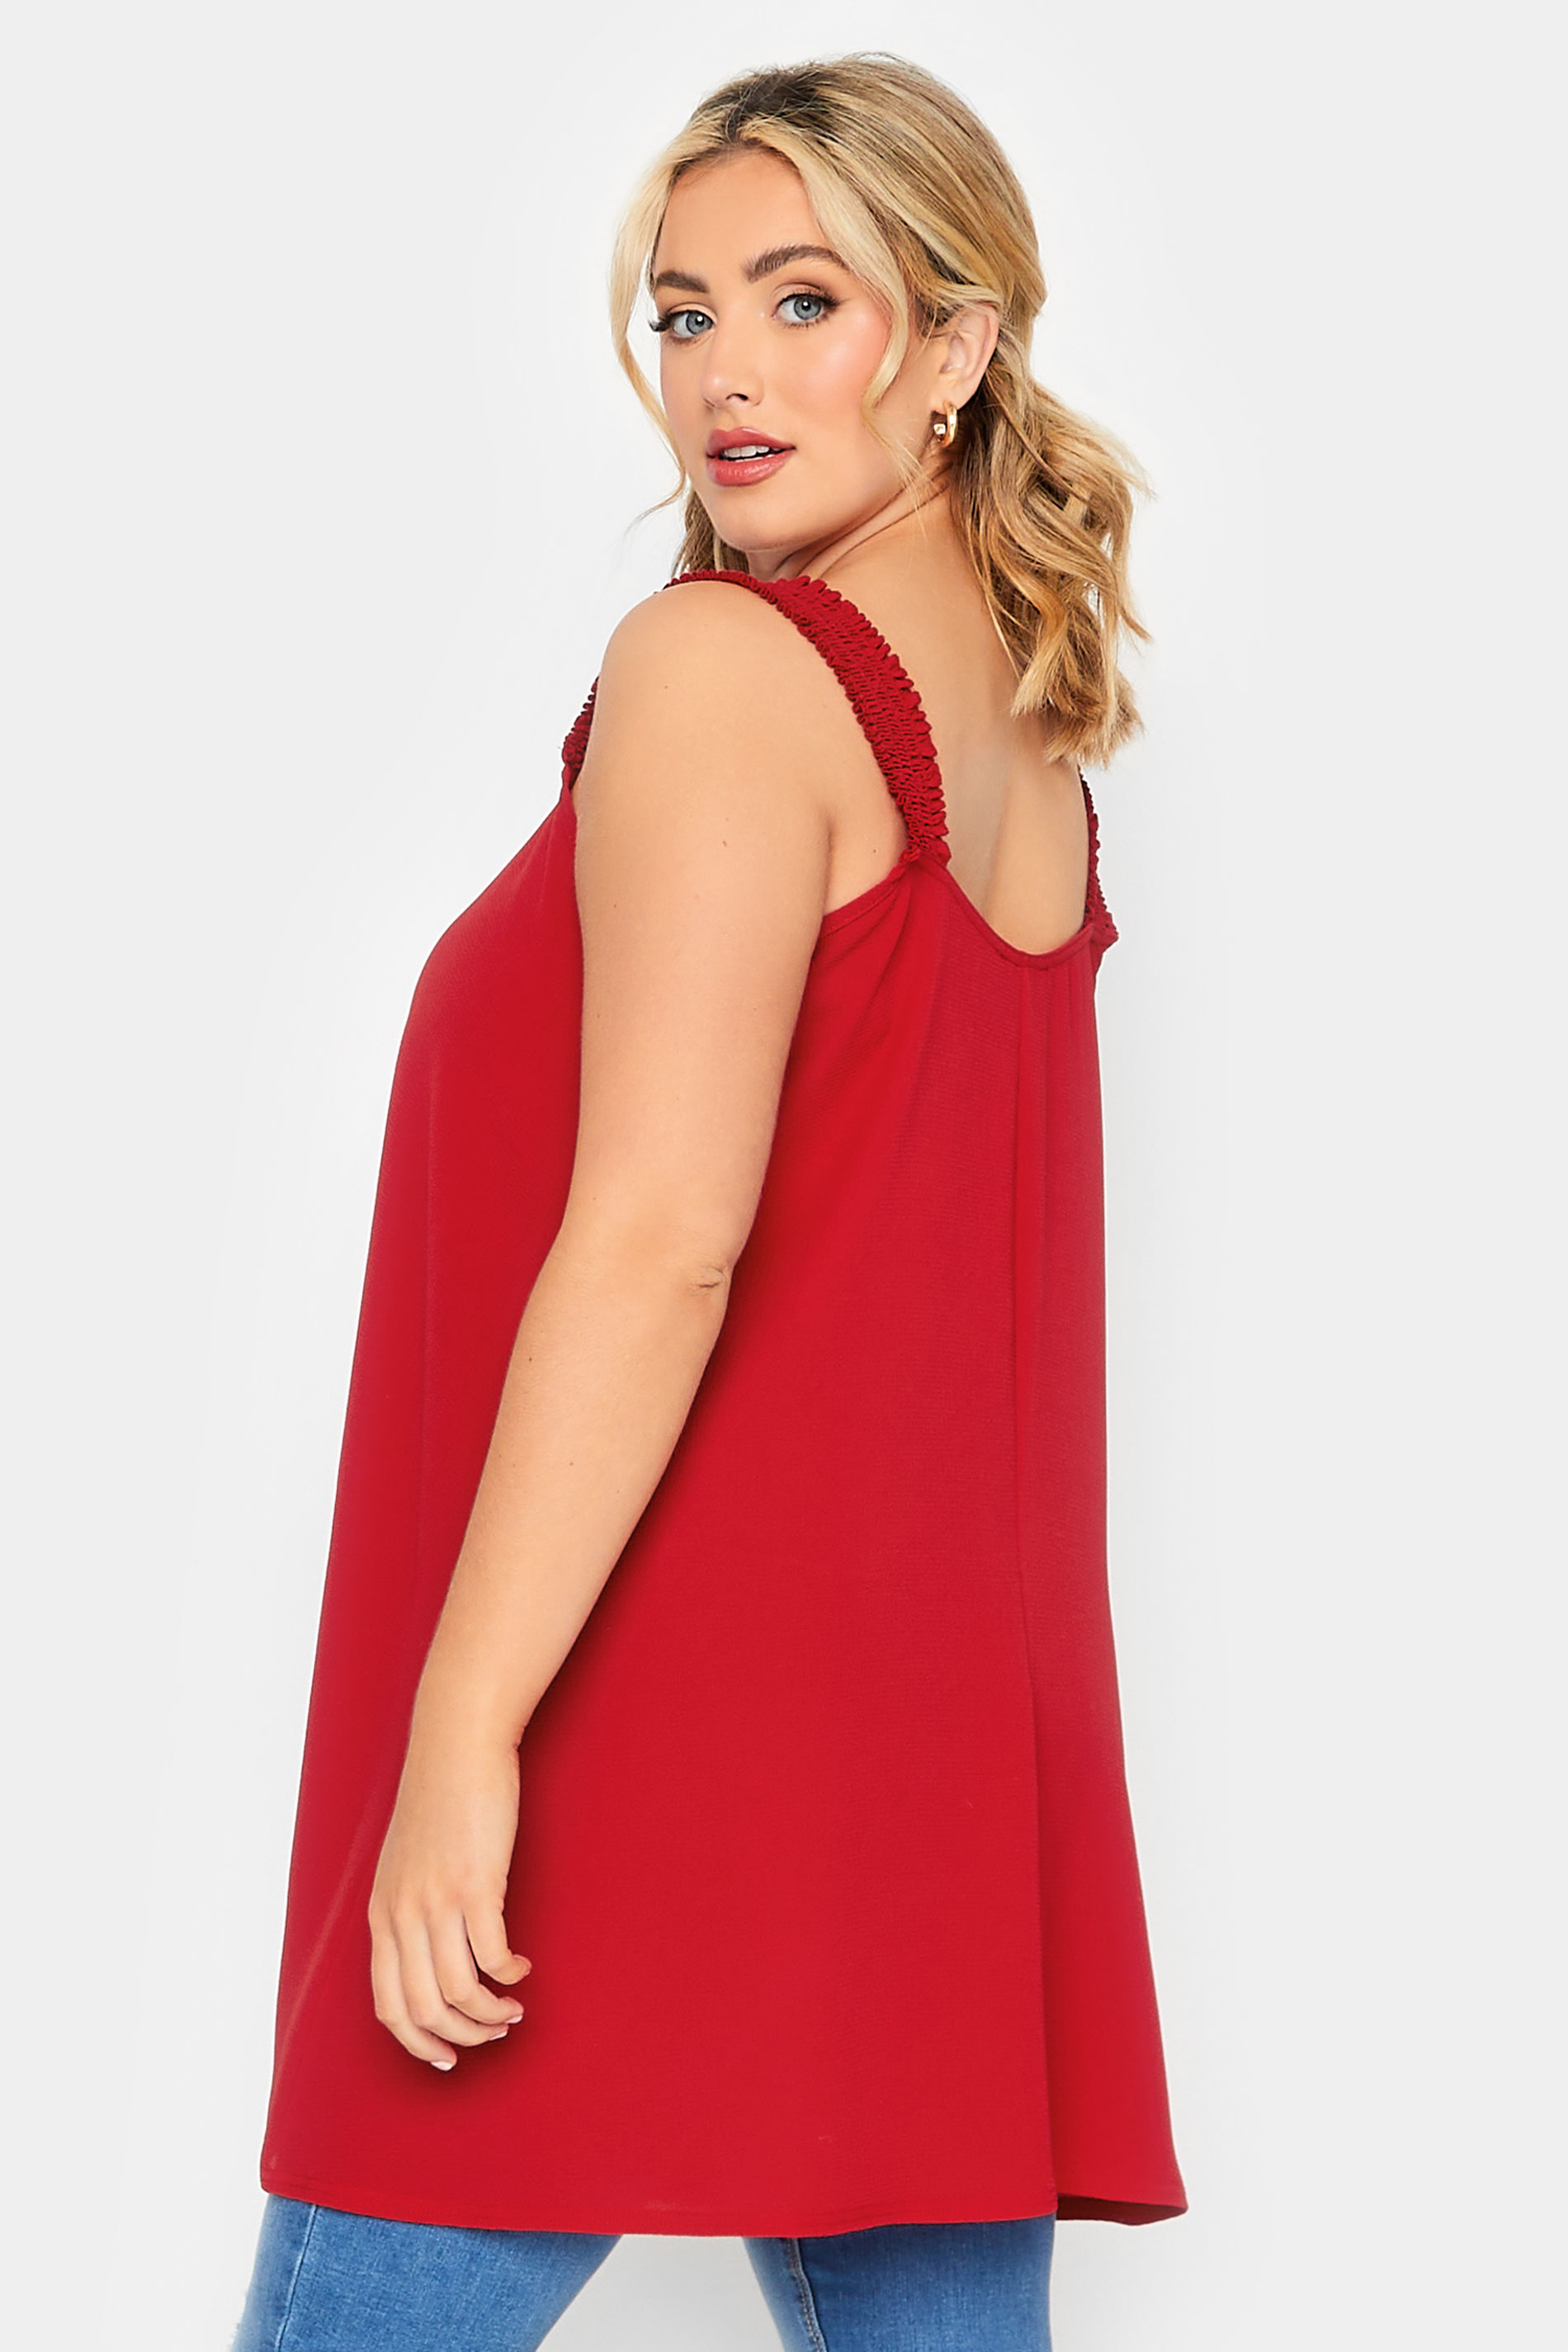 LIMITED COLLECTION Curve Plus Size Red Shirred Strap Cami Vest Top | Yours Clothing  3